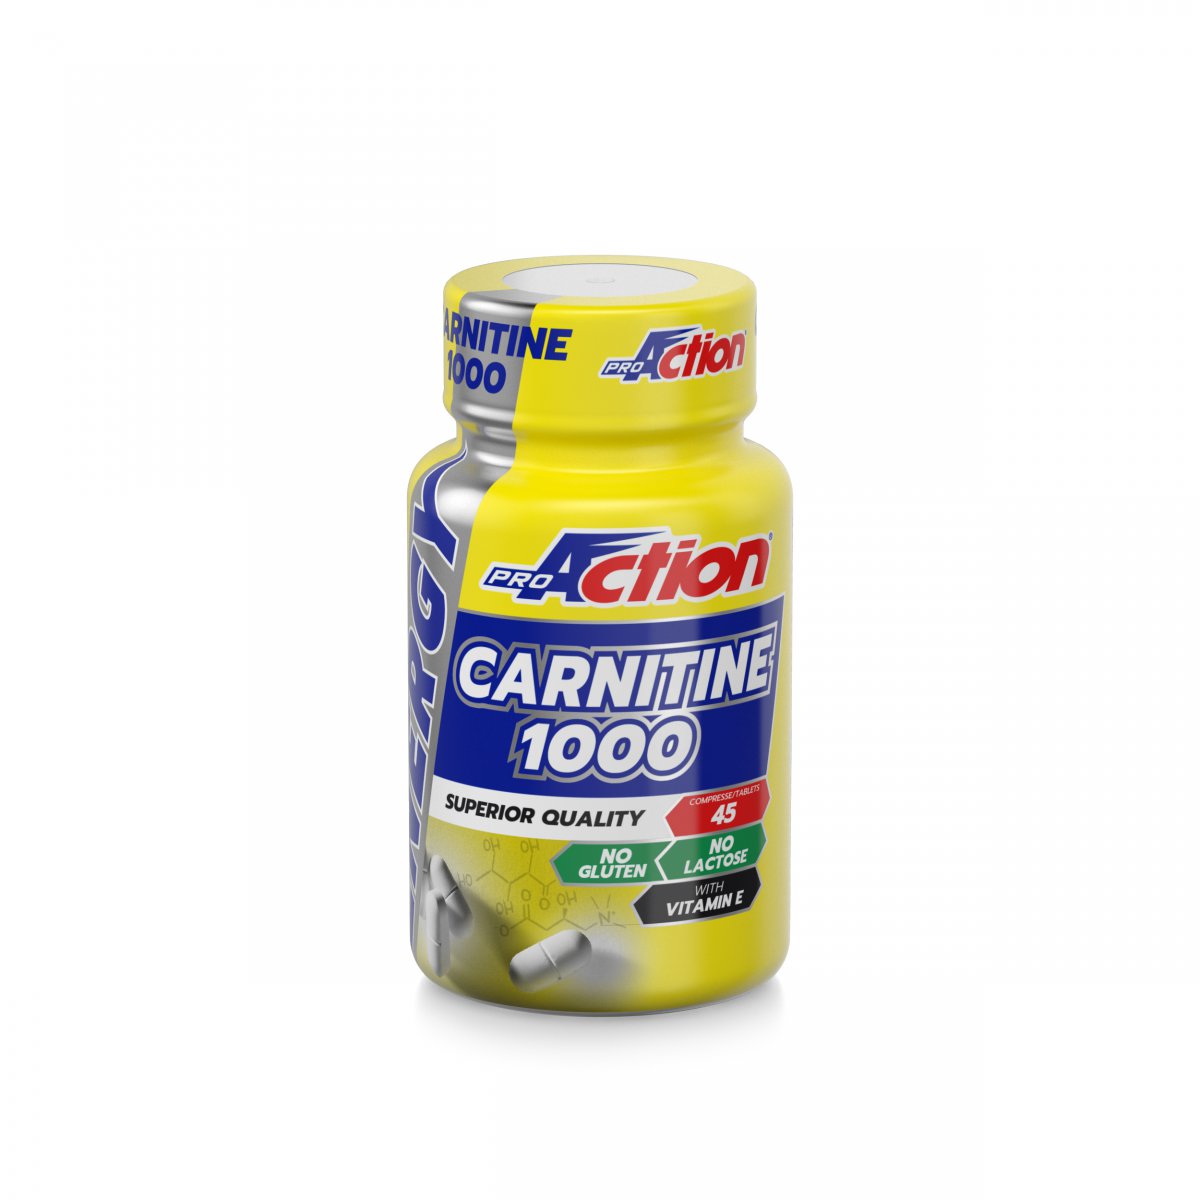 ProAction CARNITINE 1000 - Barattolo 45 cpr.  